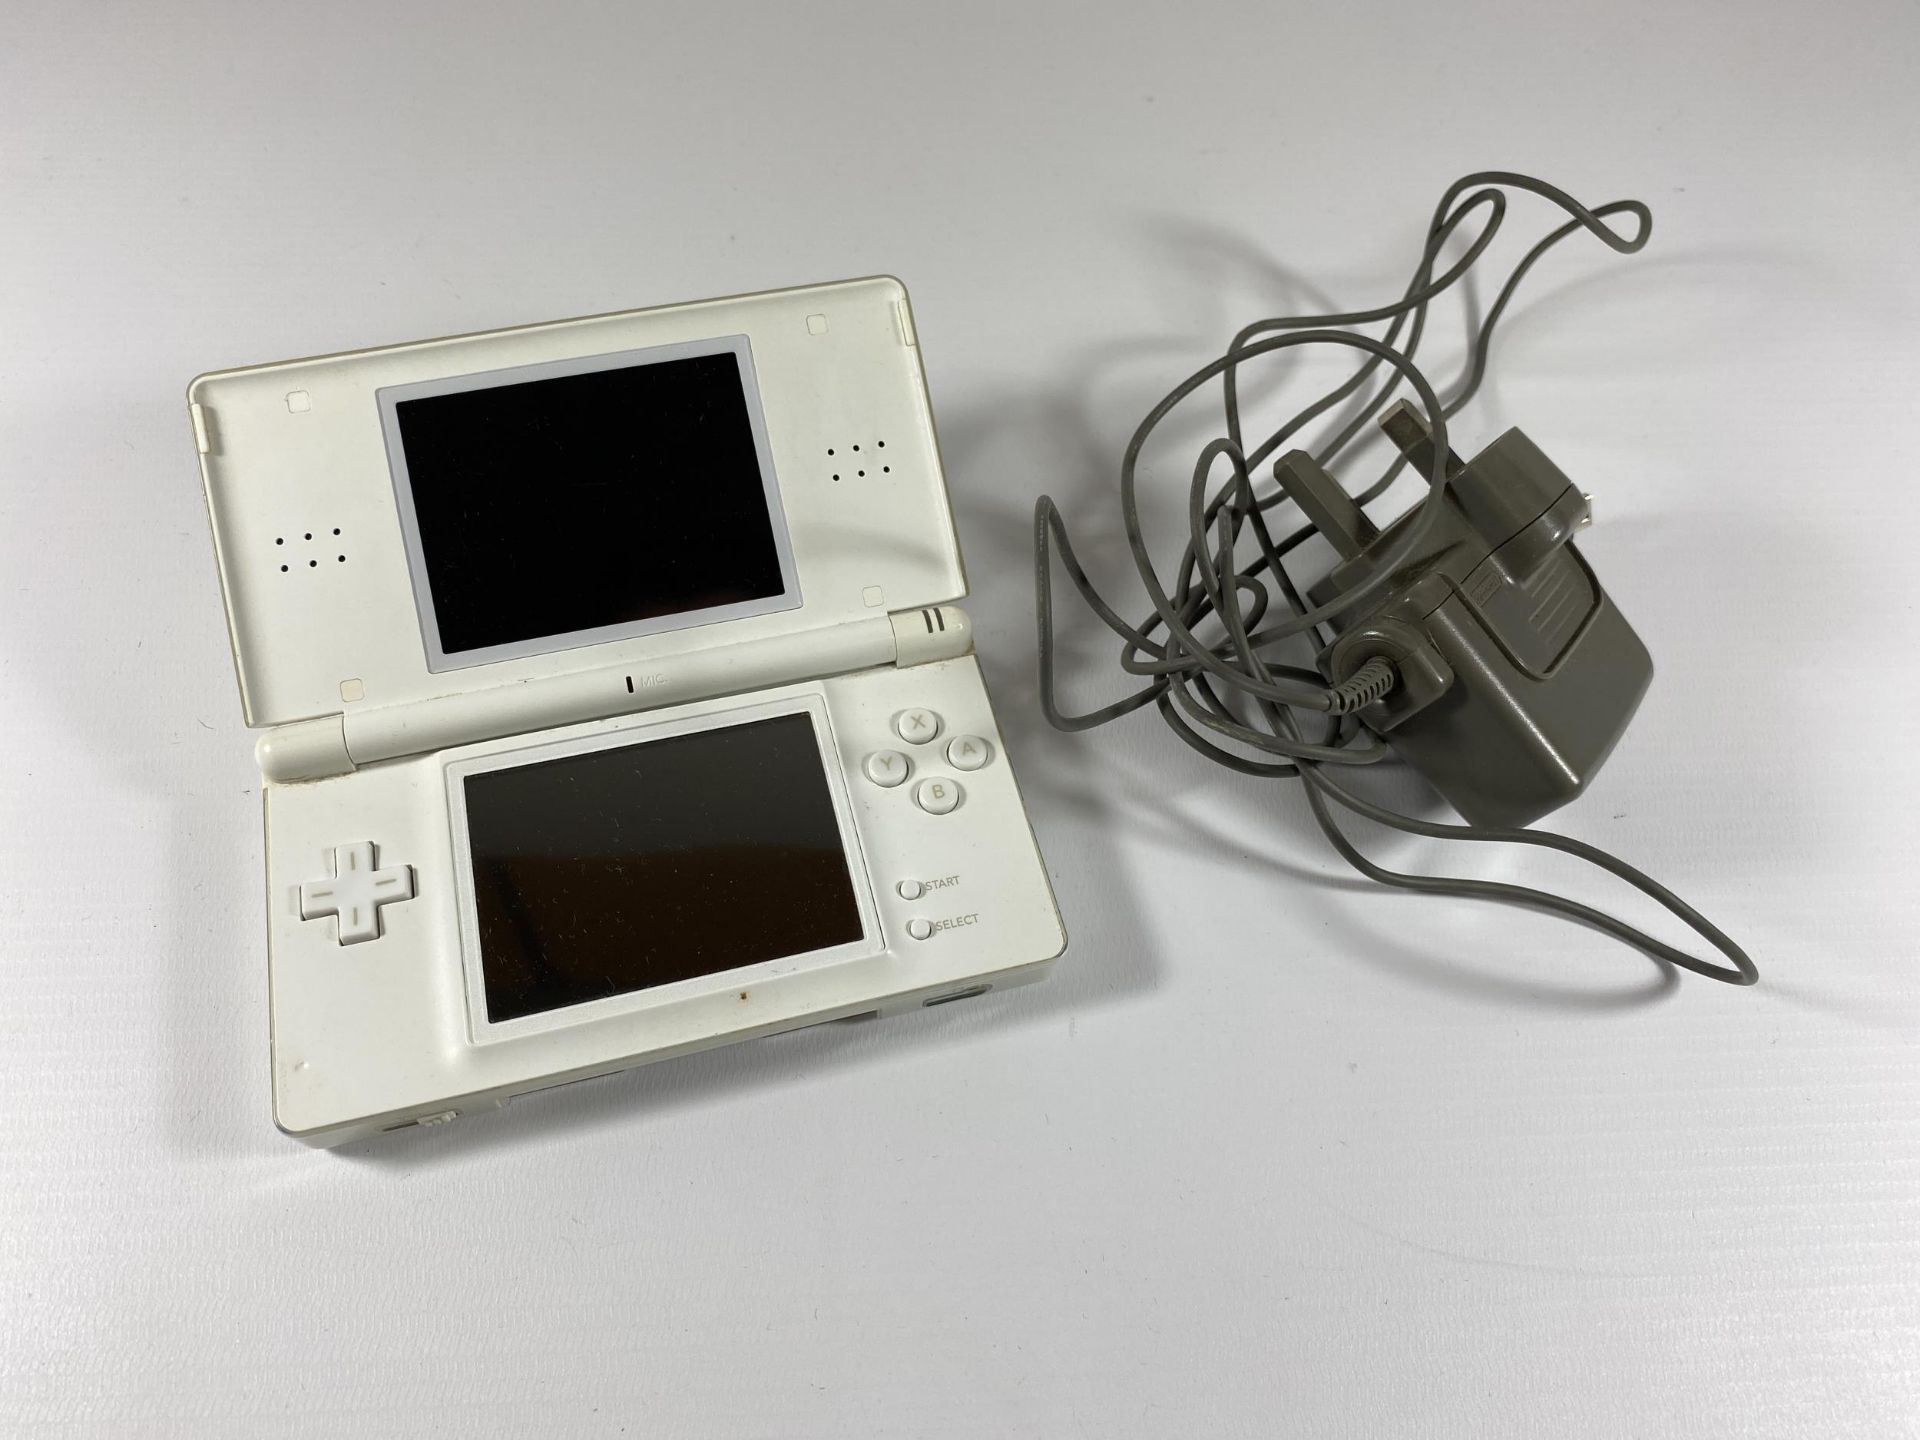 A WHITE NINTENDO DS CONSOLE & CHARGER